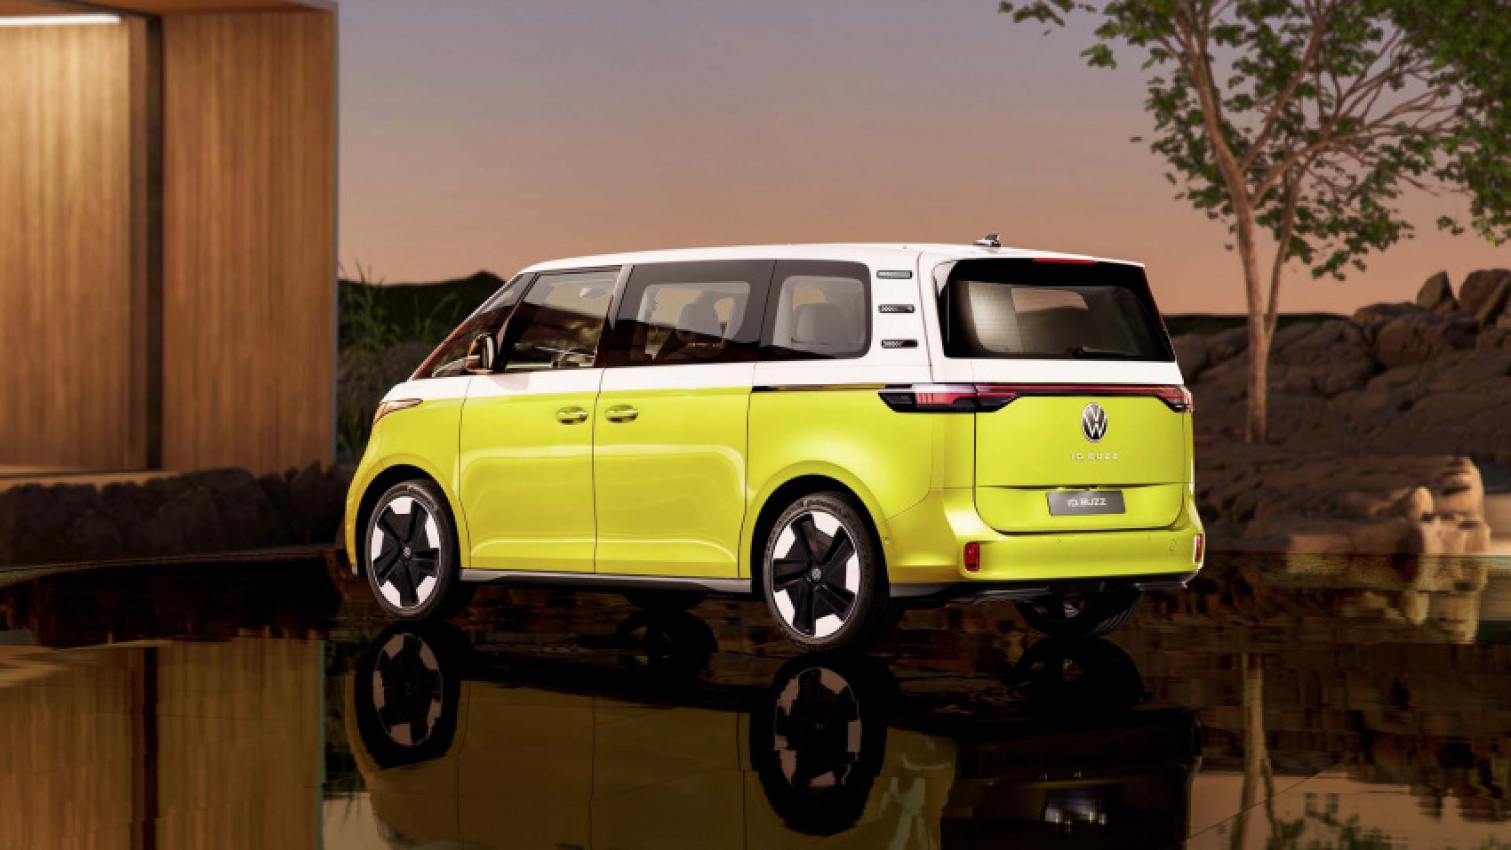 autos, cars, electric cars, volkswagen news, vw id.buzz electric microbus revealed: us version won’t be shown until 2023, sold until 2024